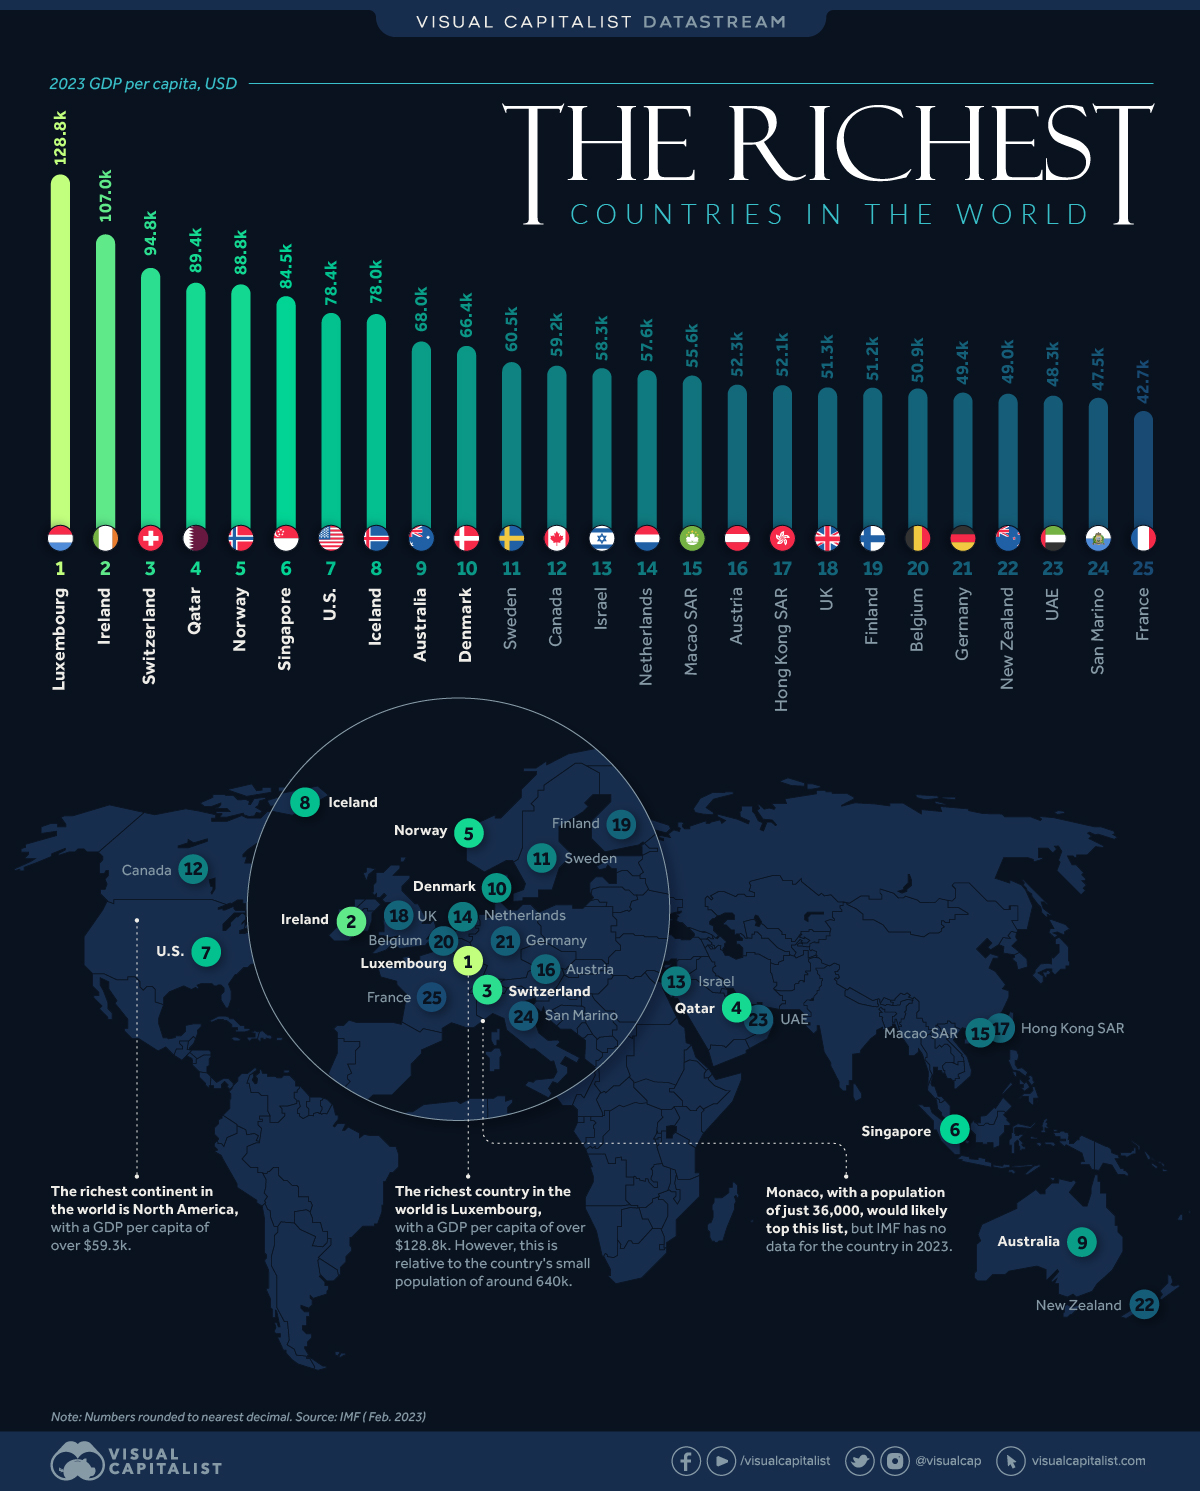 Which country is the richest?